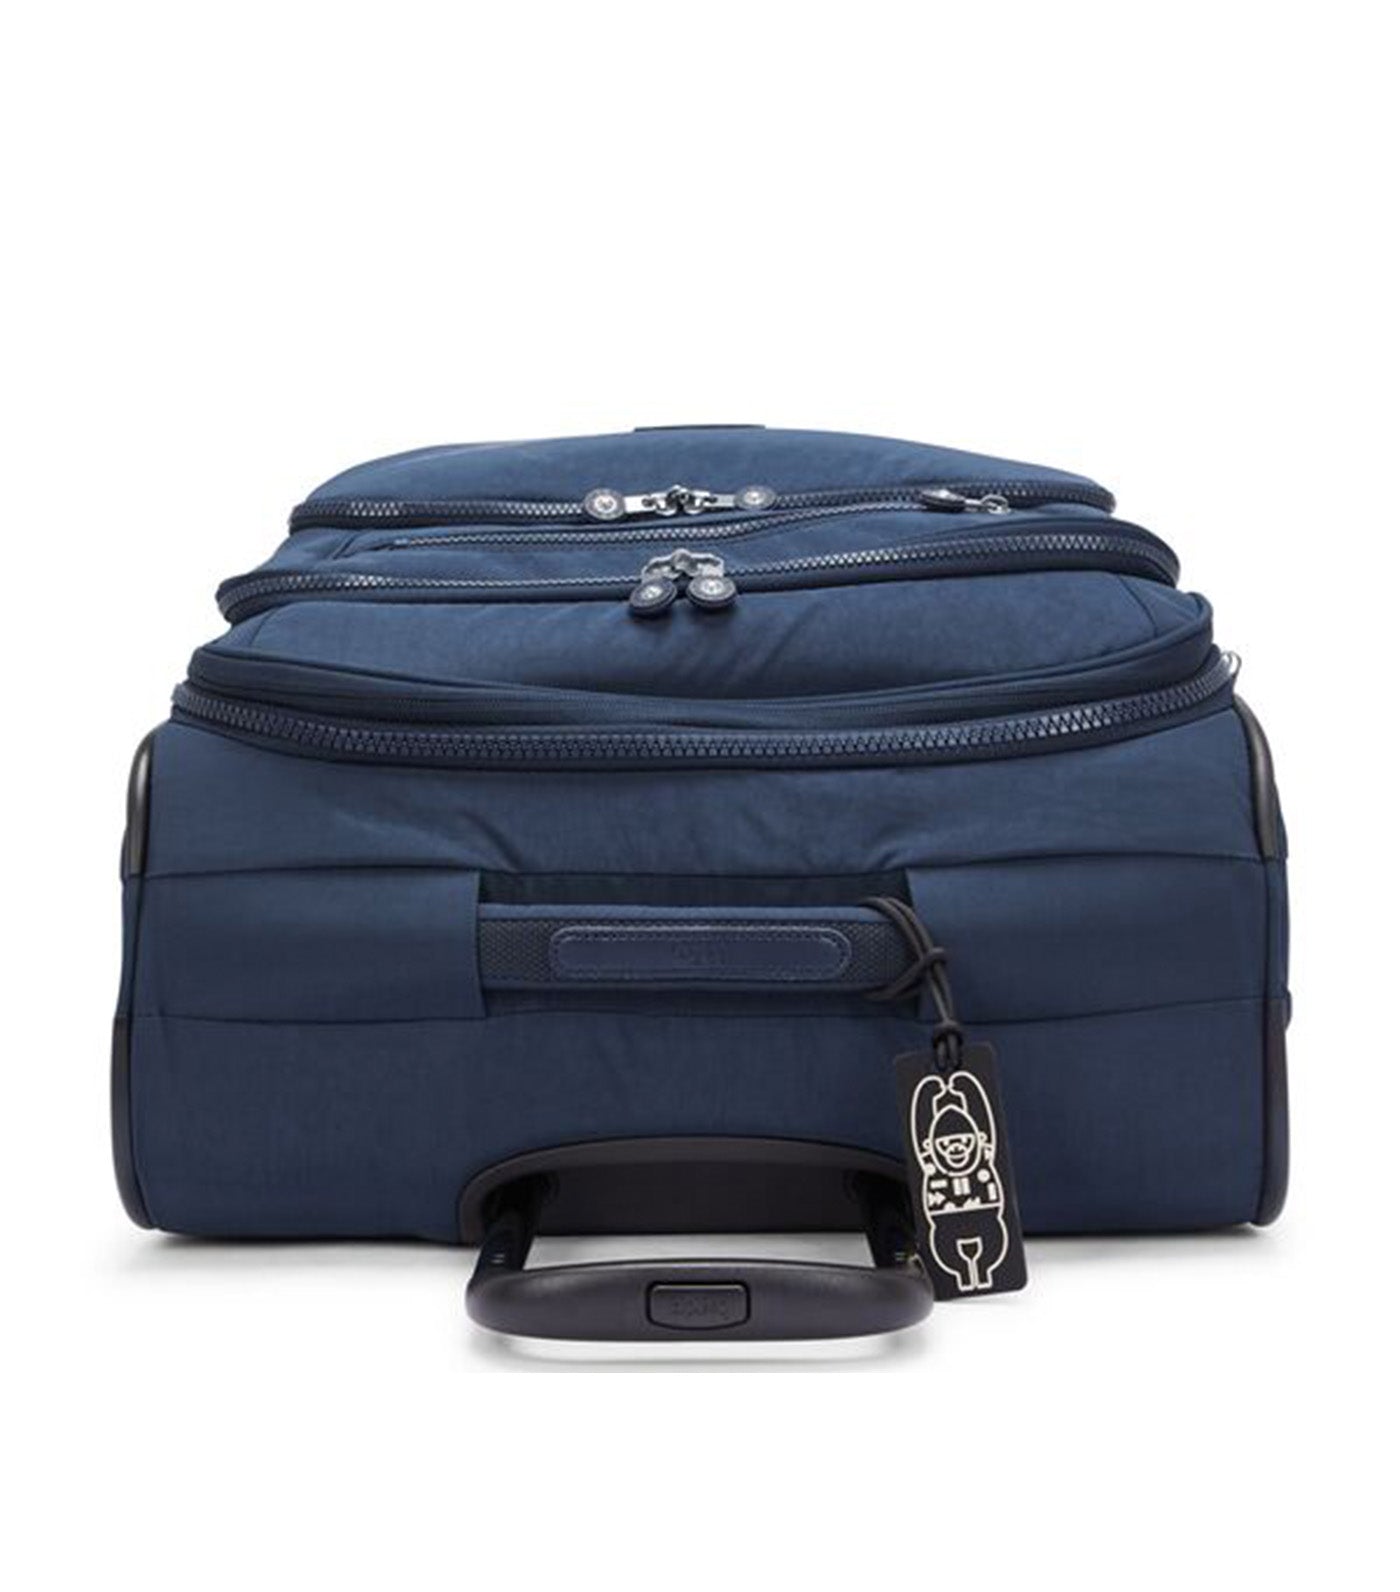 New Youri Spin Carry On Blue Bleu 2 (M)